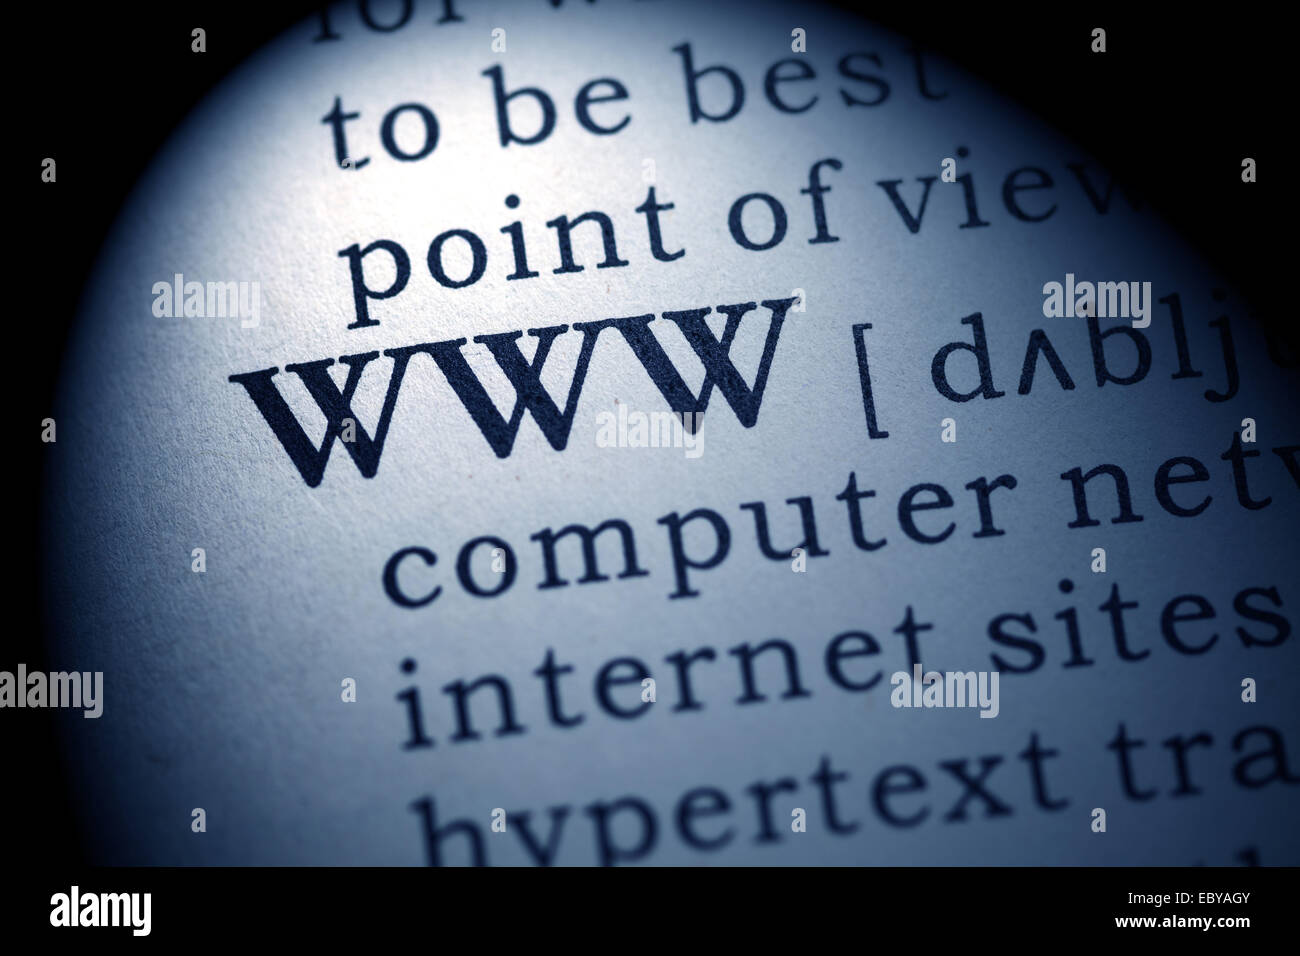 Fake Dictionary, Dictionary definition of the word www. Stock Photo